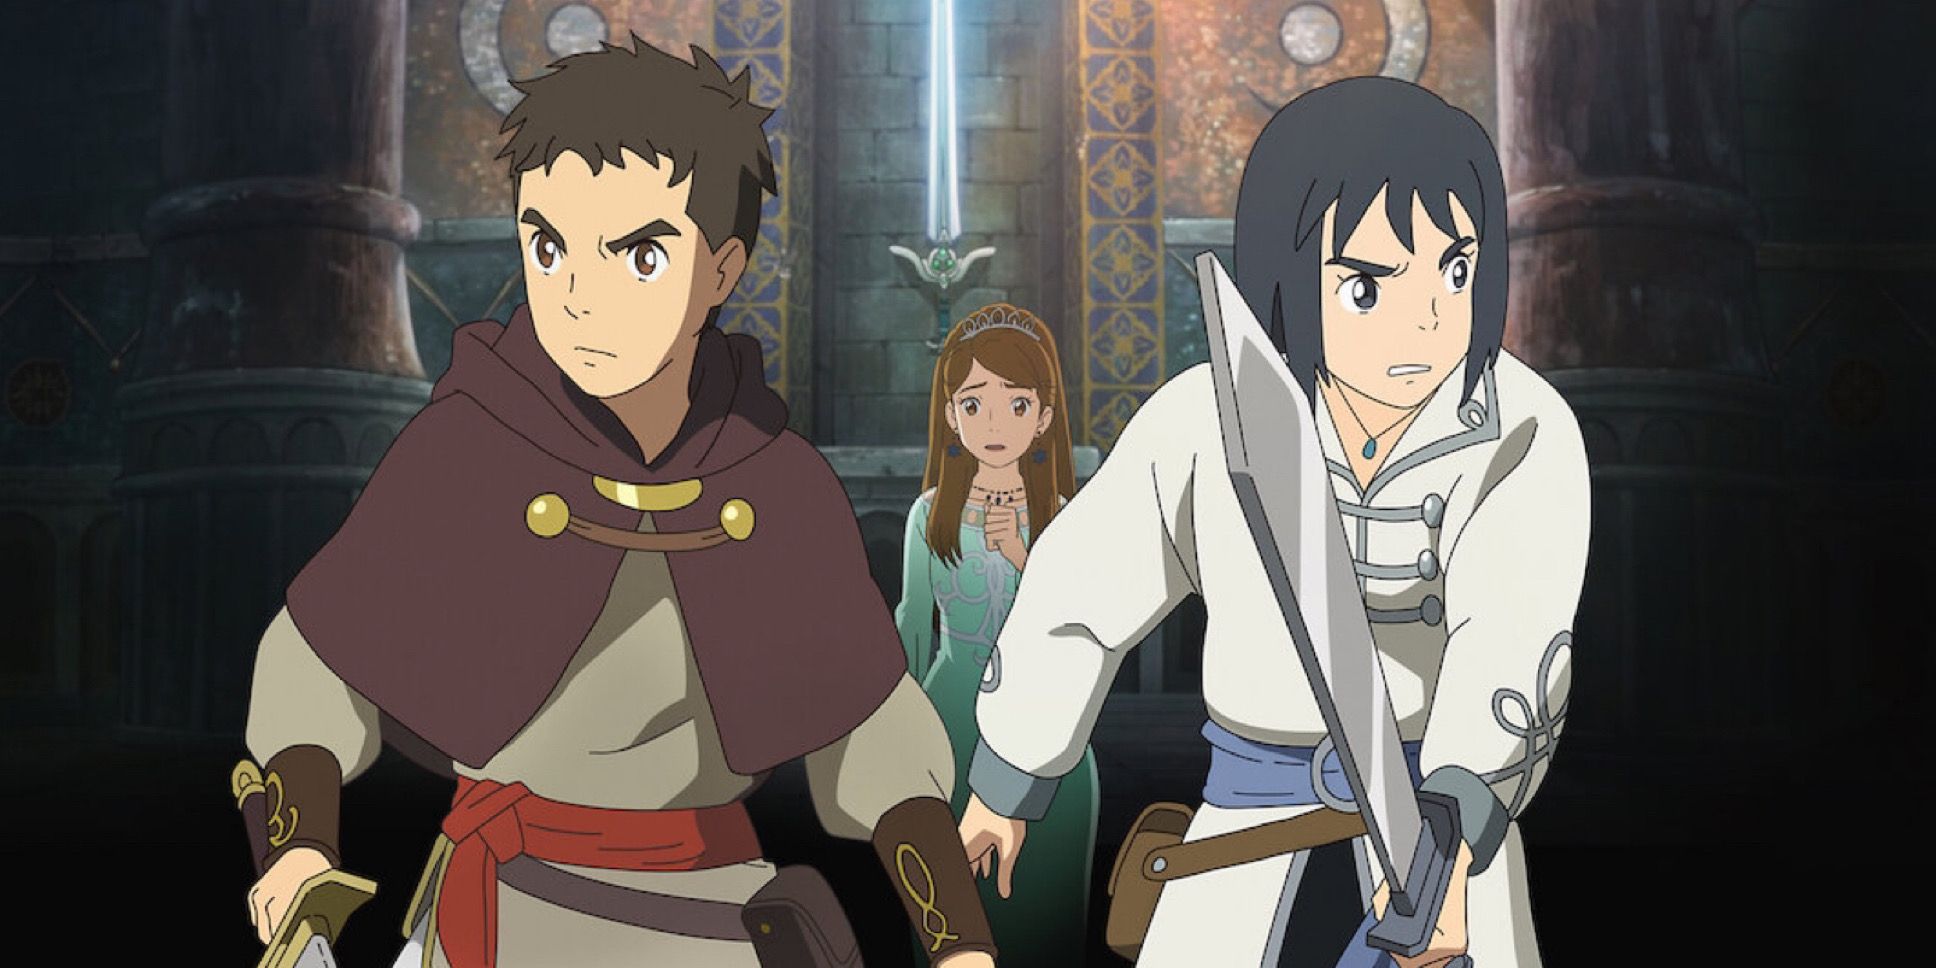 From the anime film version of Ni no Kuni.